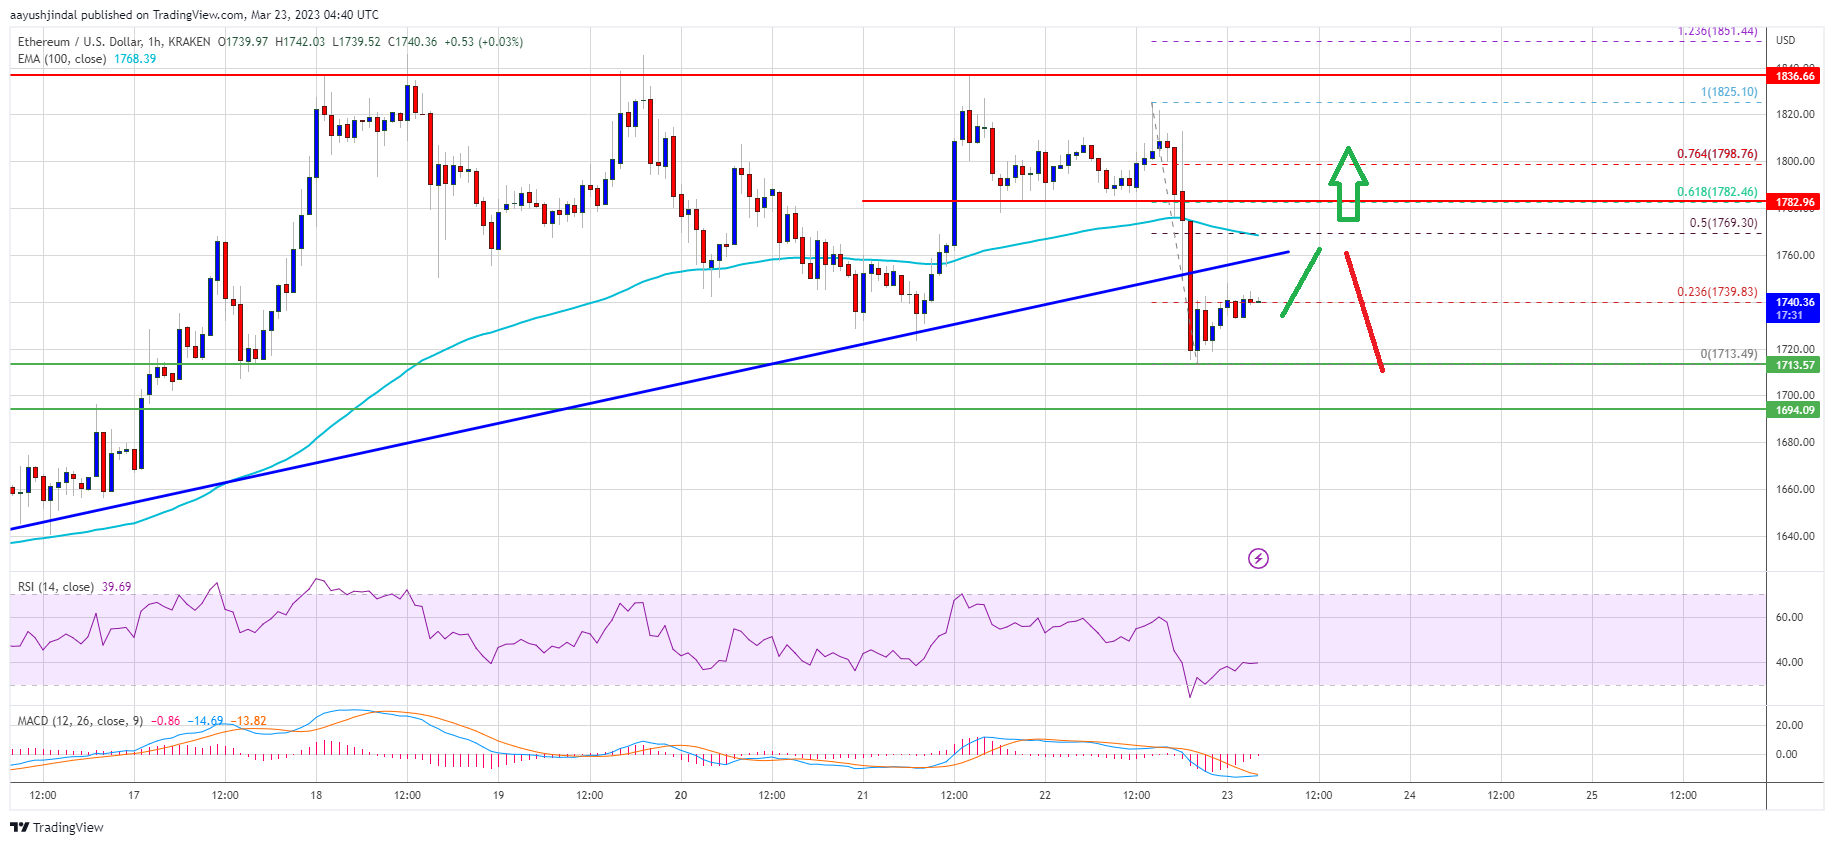 Ethereum Price Just Saw Key Technical Correction But Key Support Intact